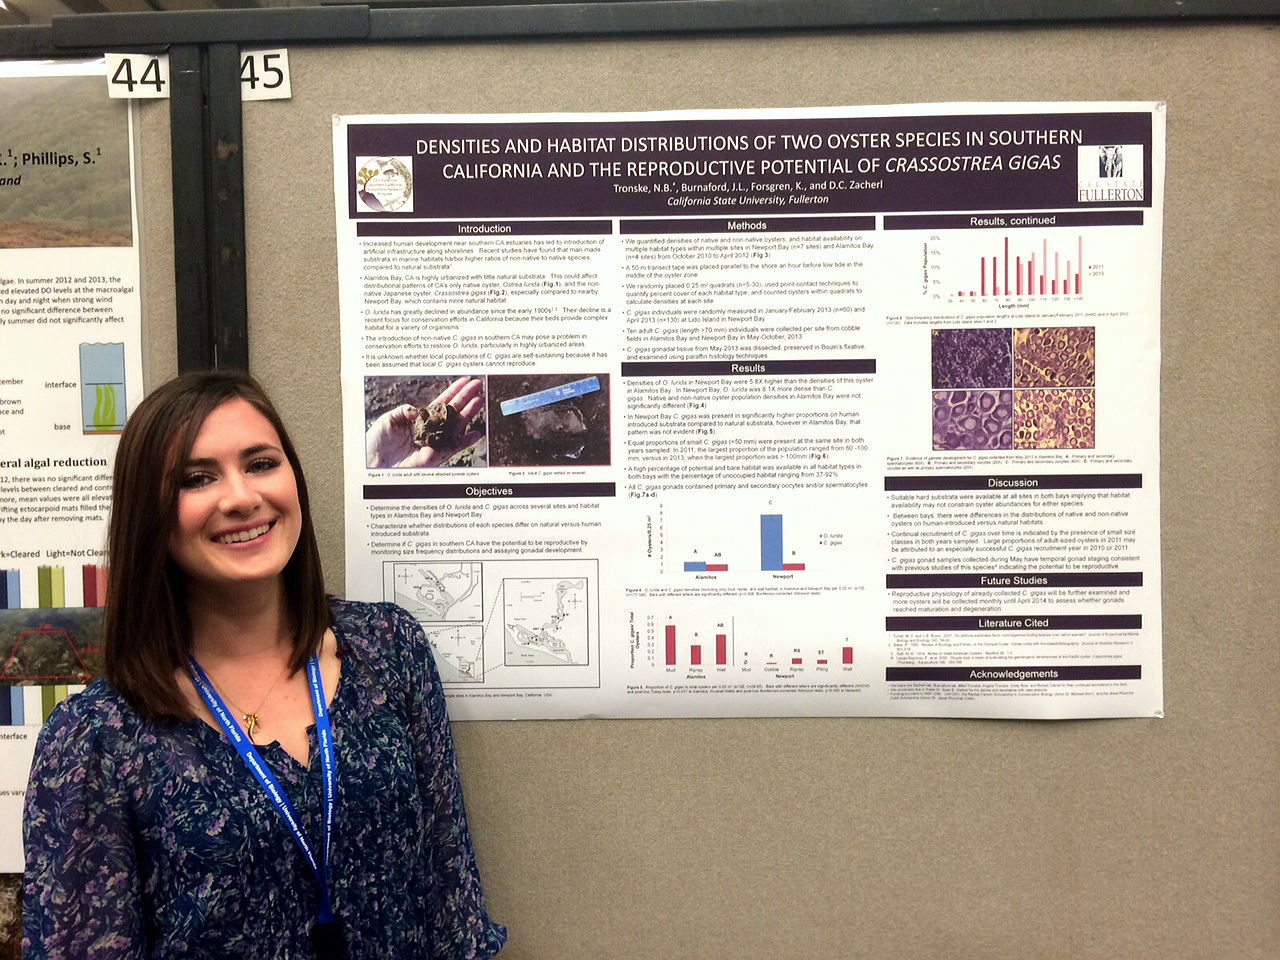 Nicole Tronske at the 2014 Benthic Ecology Meeetings